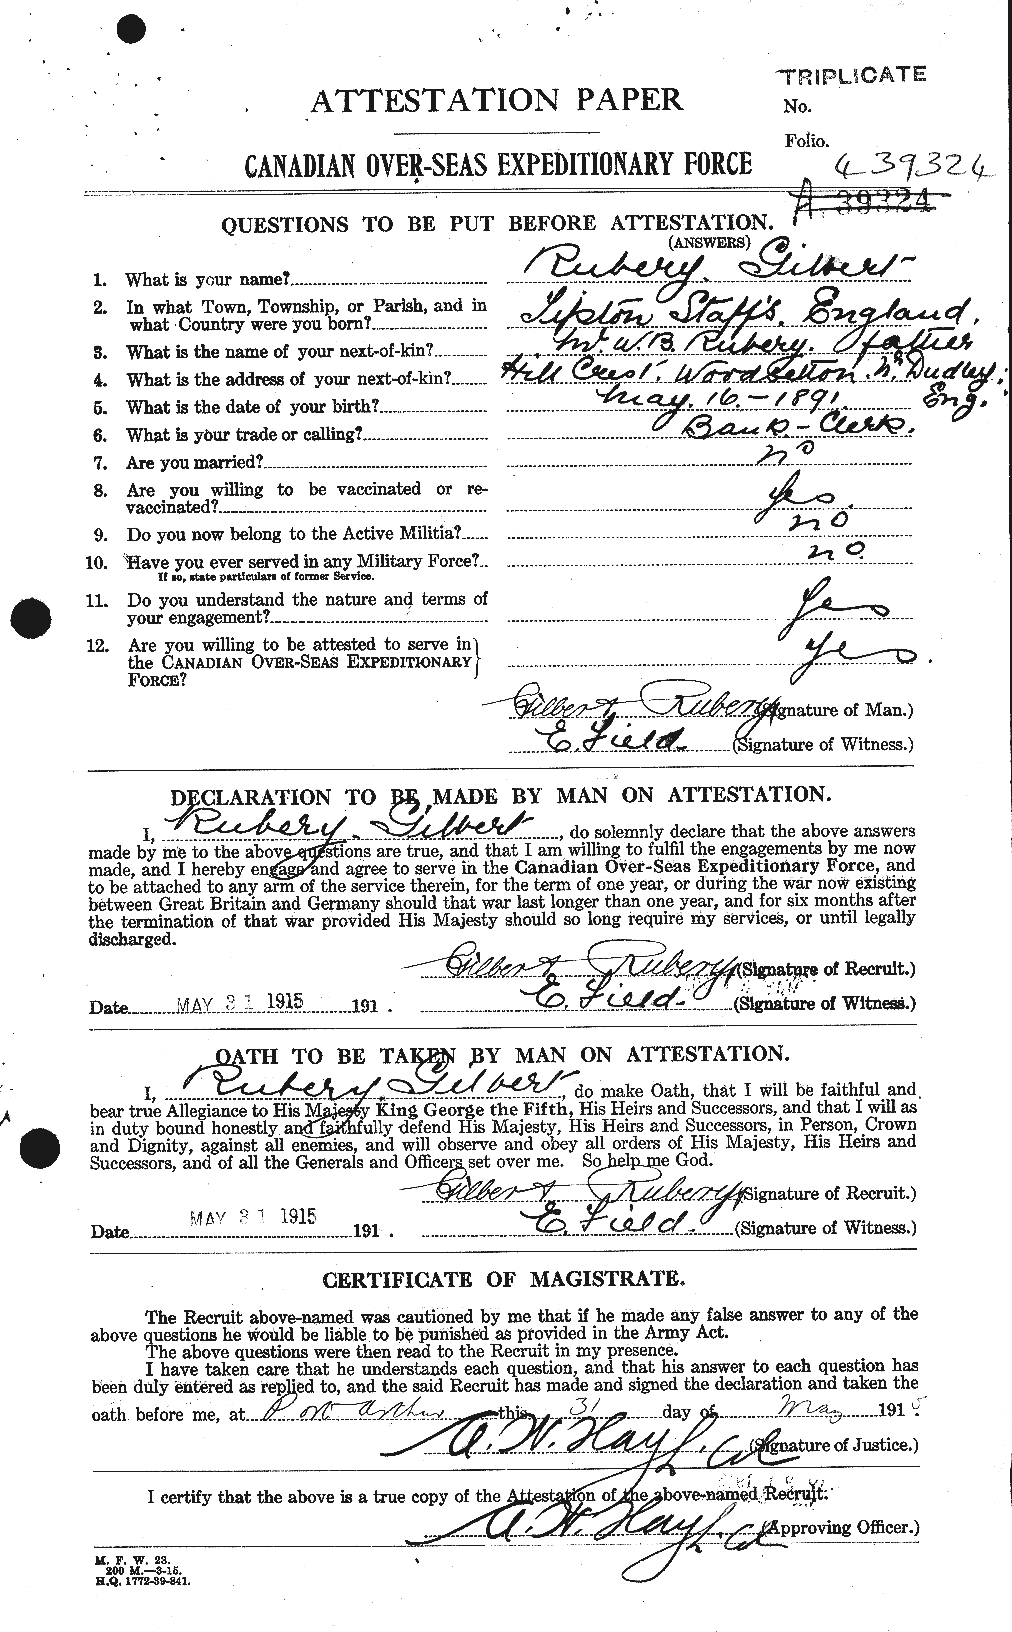 Personnel Records of the First World War - CEF 616409a